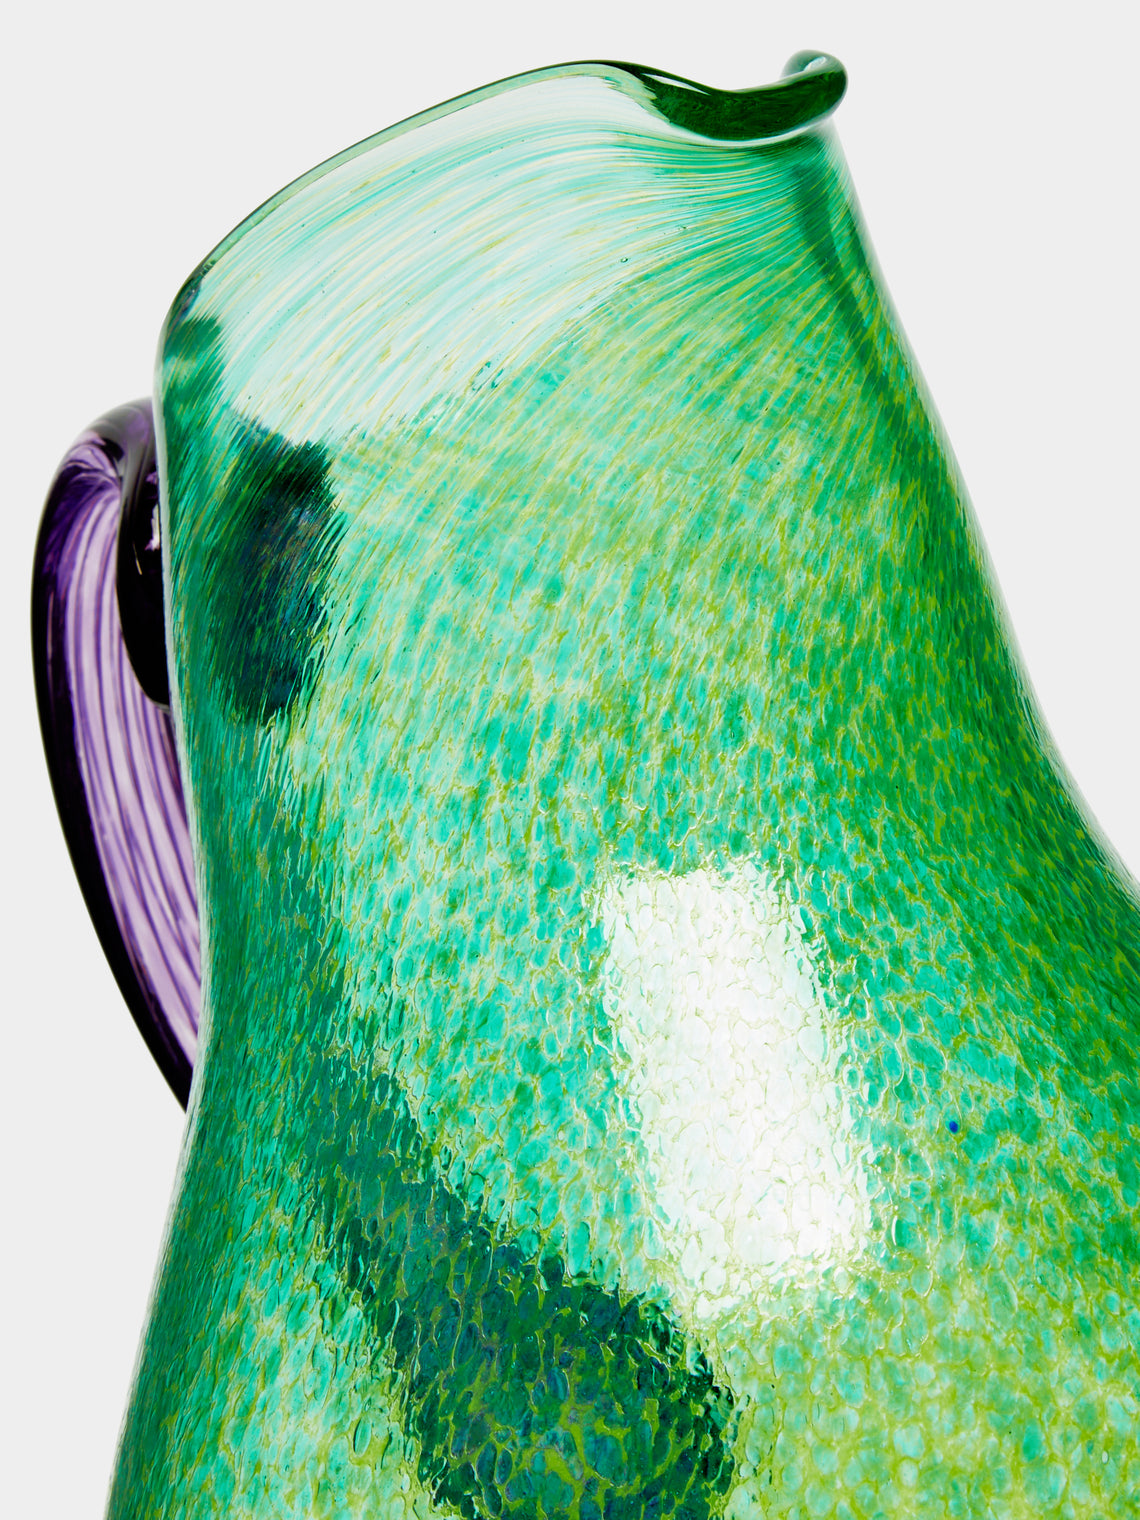 Antique and Vintage - 1950s Kosta Boda Murano Glass Pitcher -  - ABASK